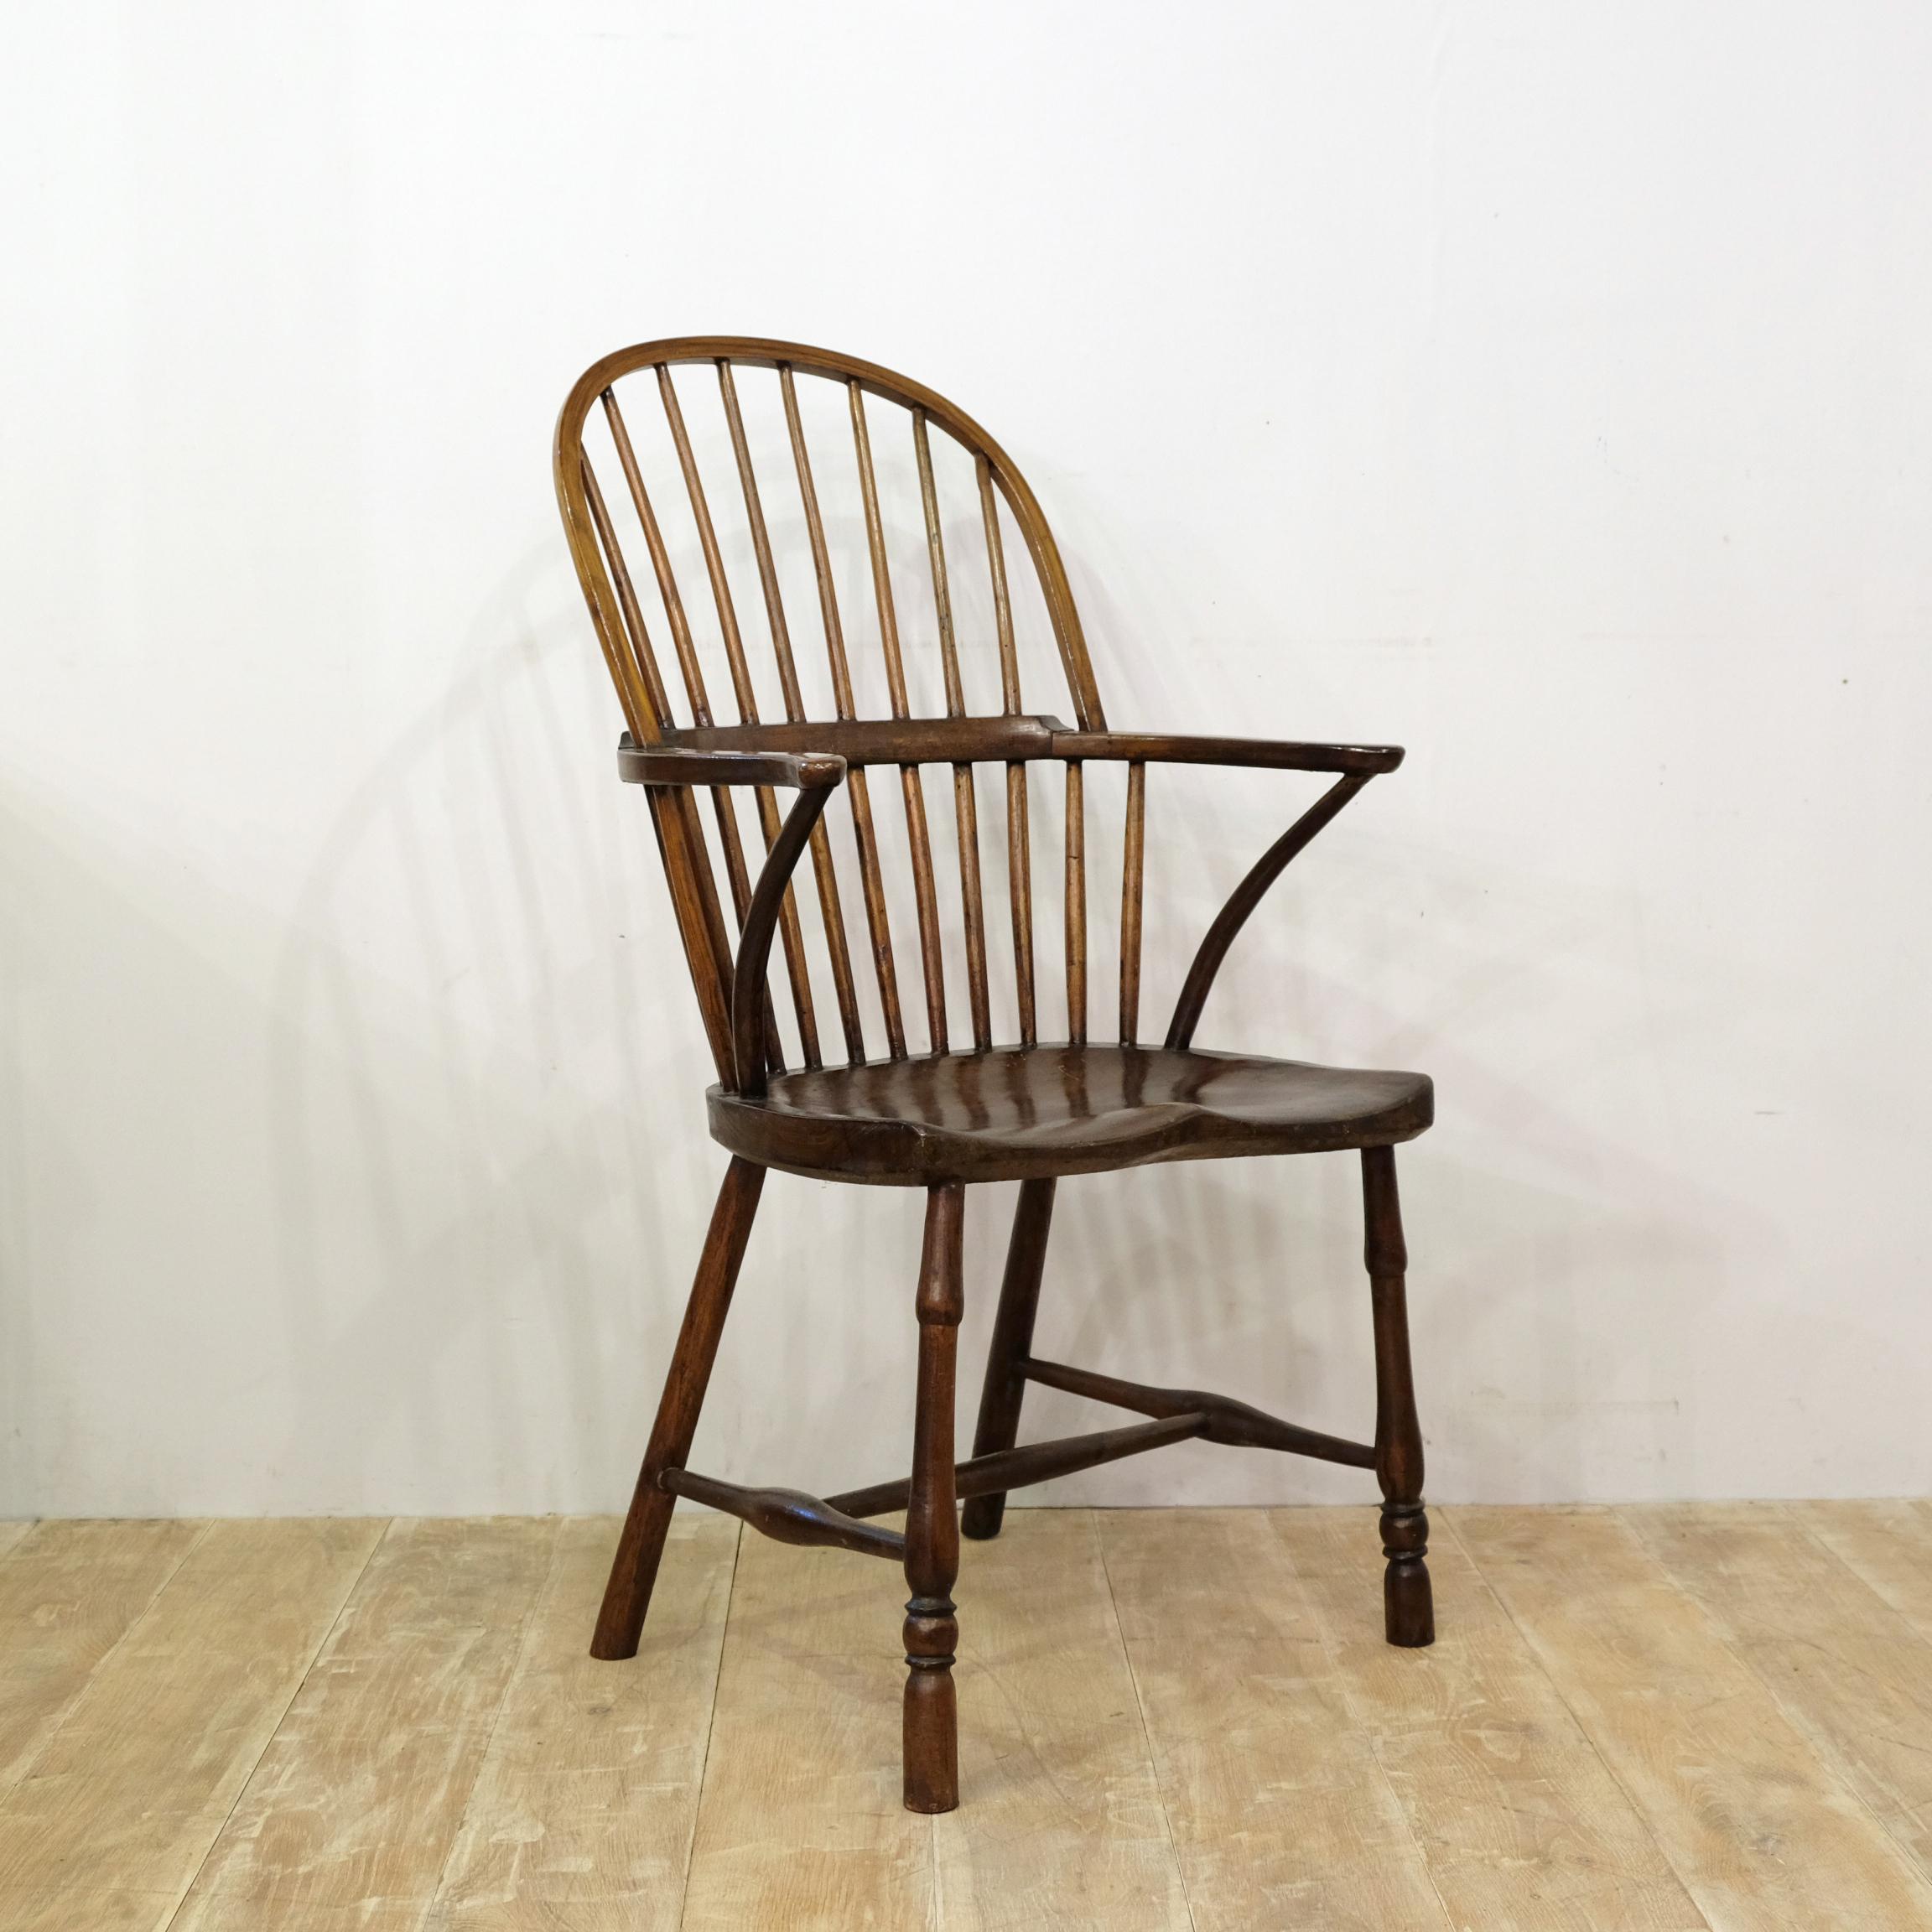 English West Country Mid-19th Century Stickback Windsor Chair 1